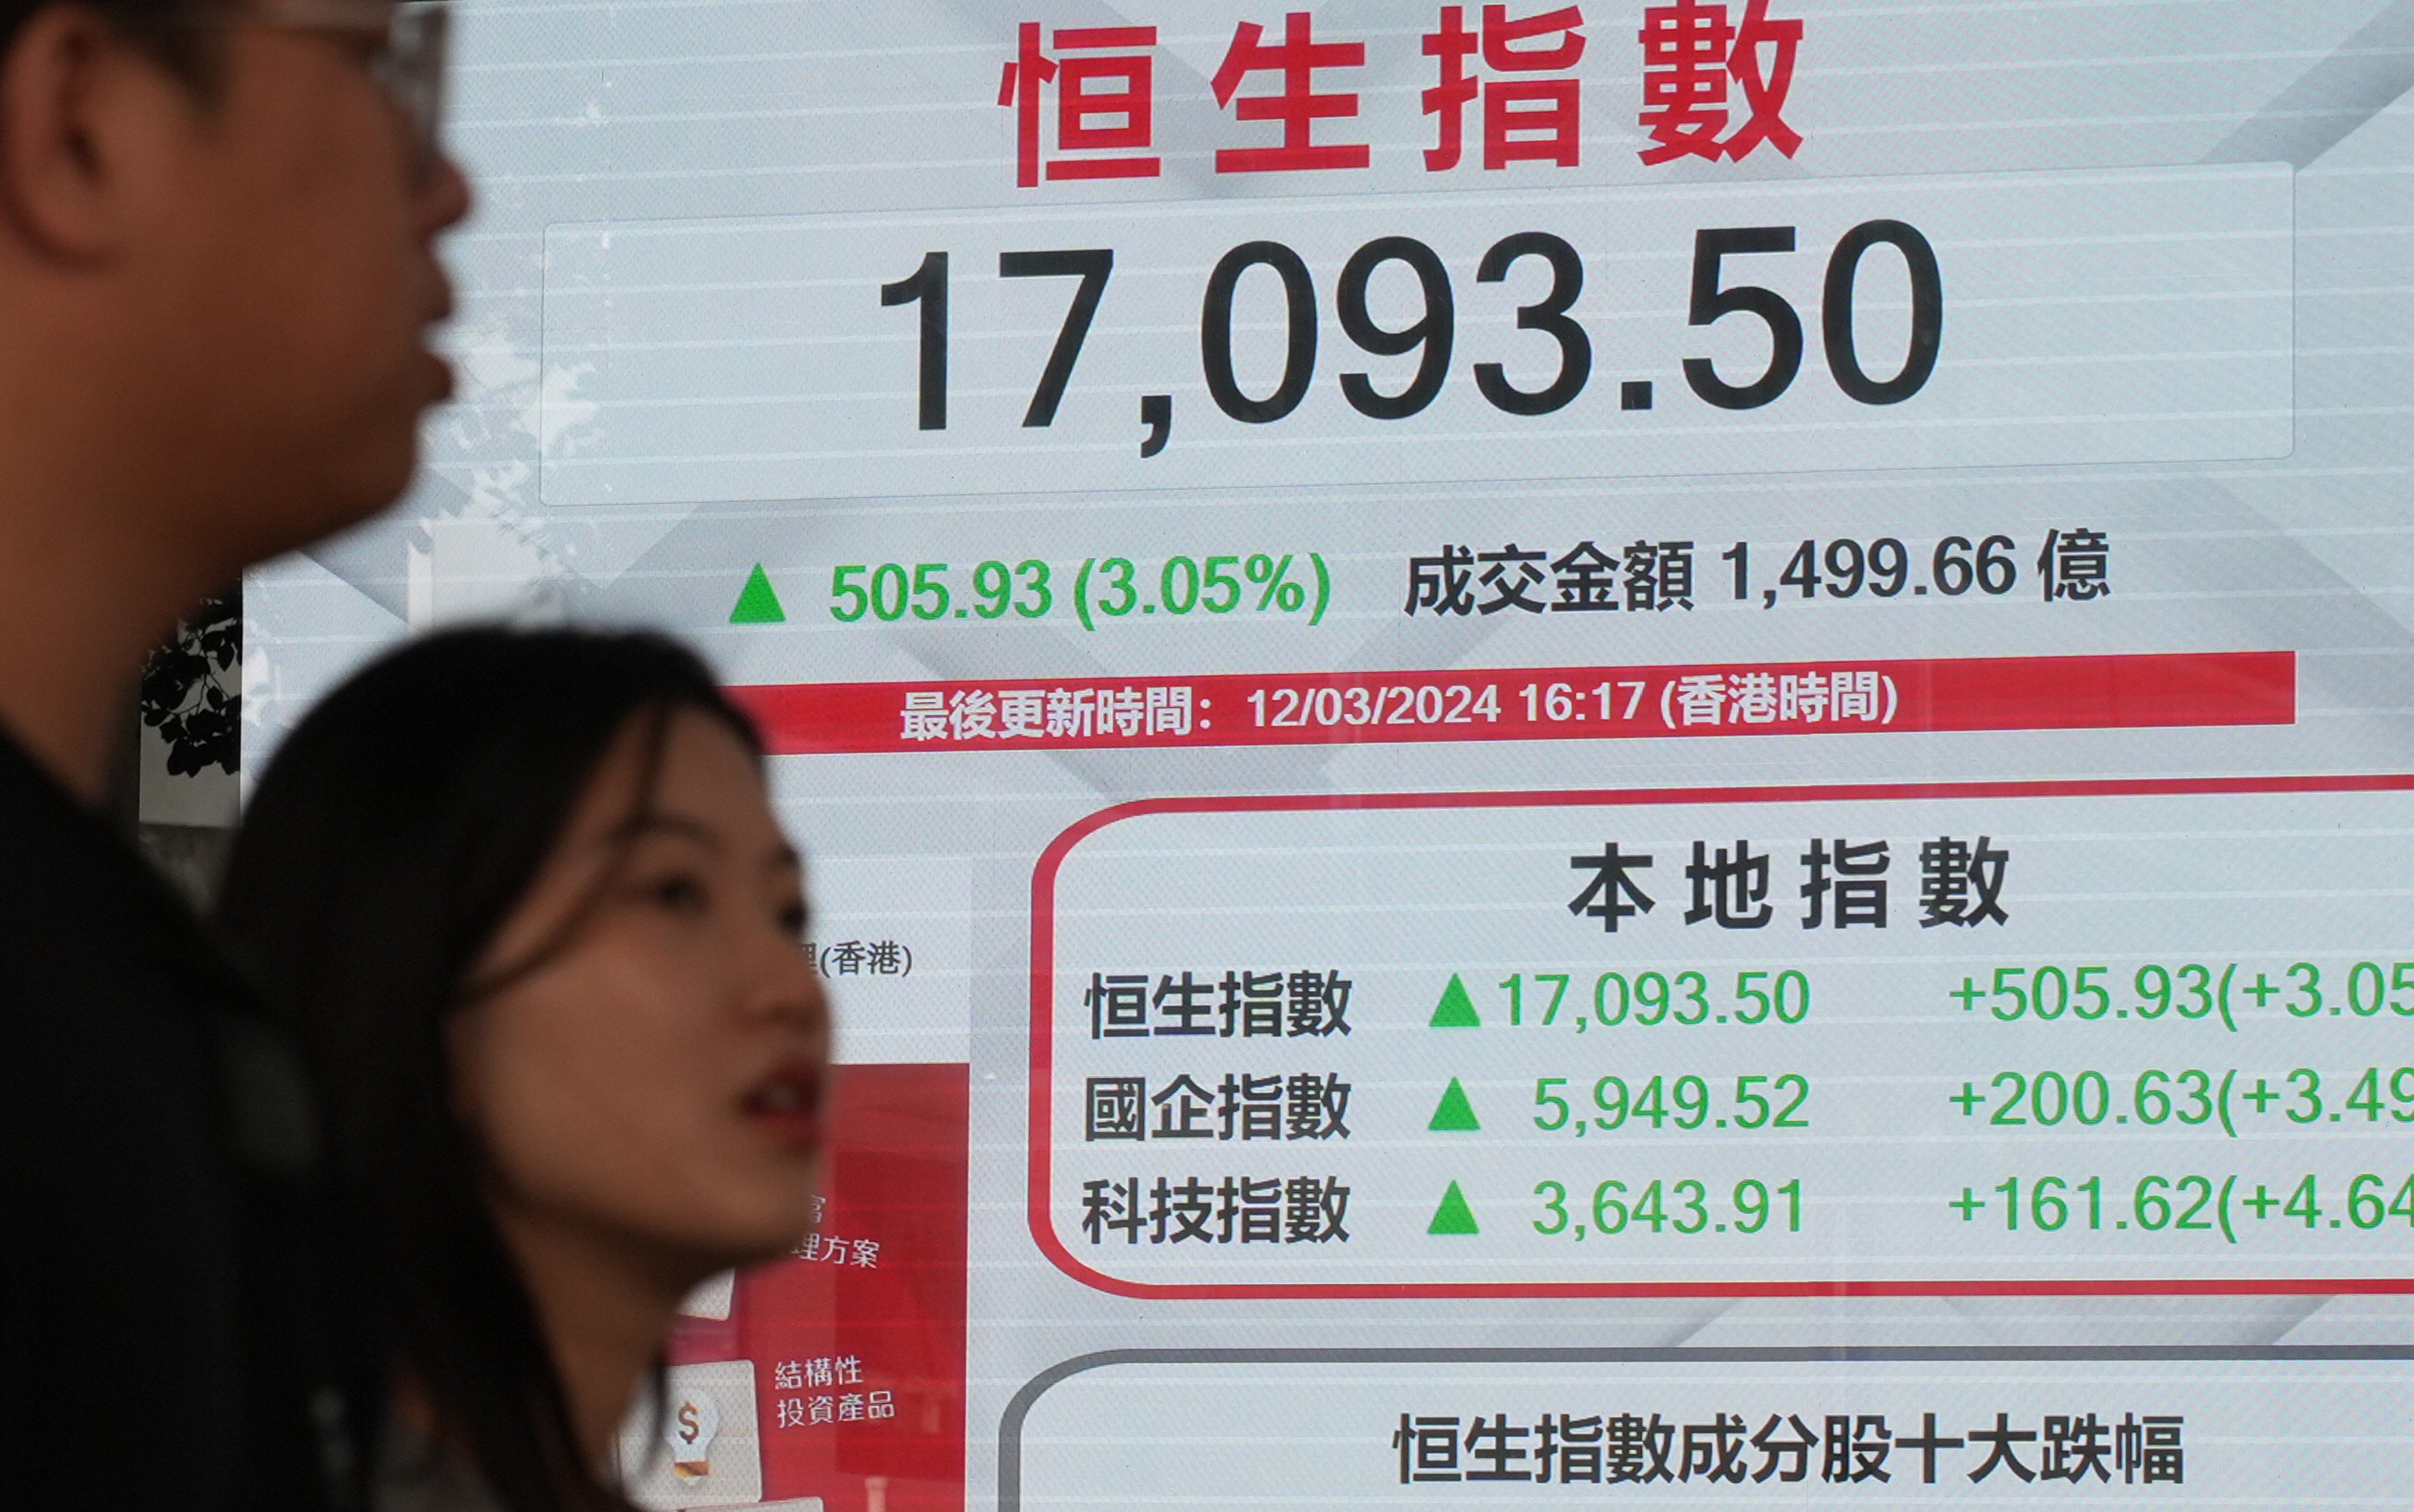 The Hang Seng Index, which surged as much as 31 per cent in May from a January low in a US$1.2 trillion bull run, has been struggling to find direction lately. Photo: Eugene Lee